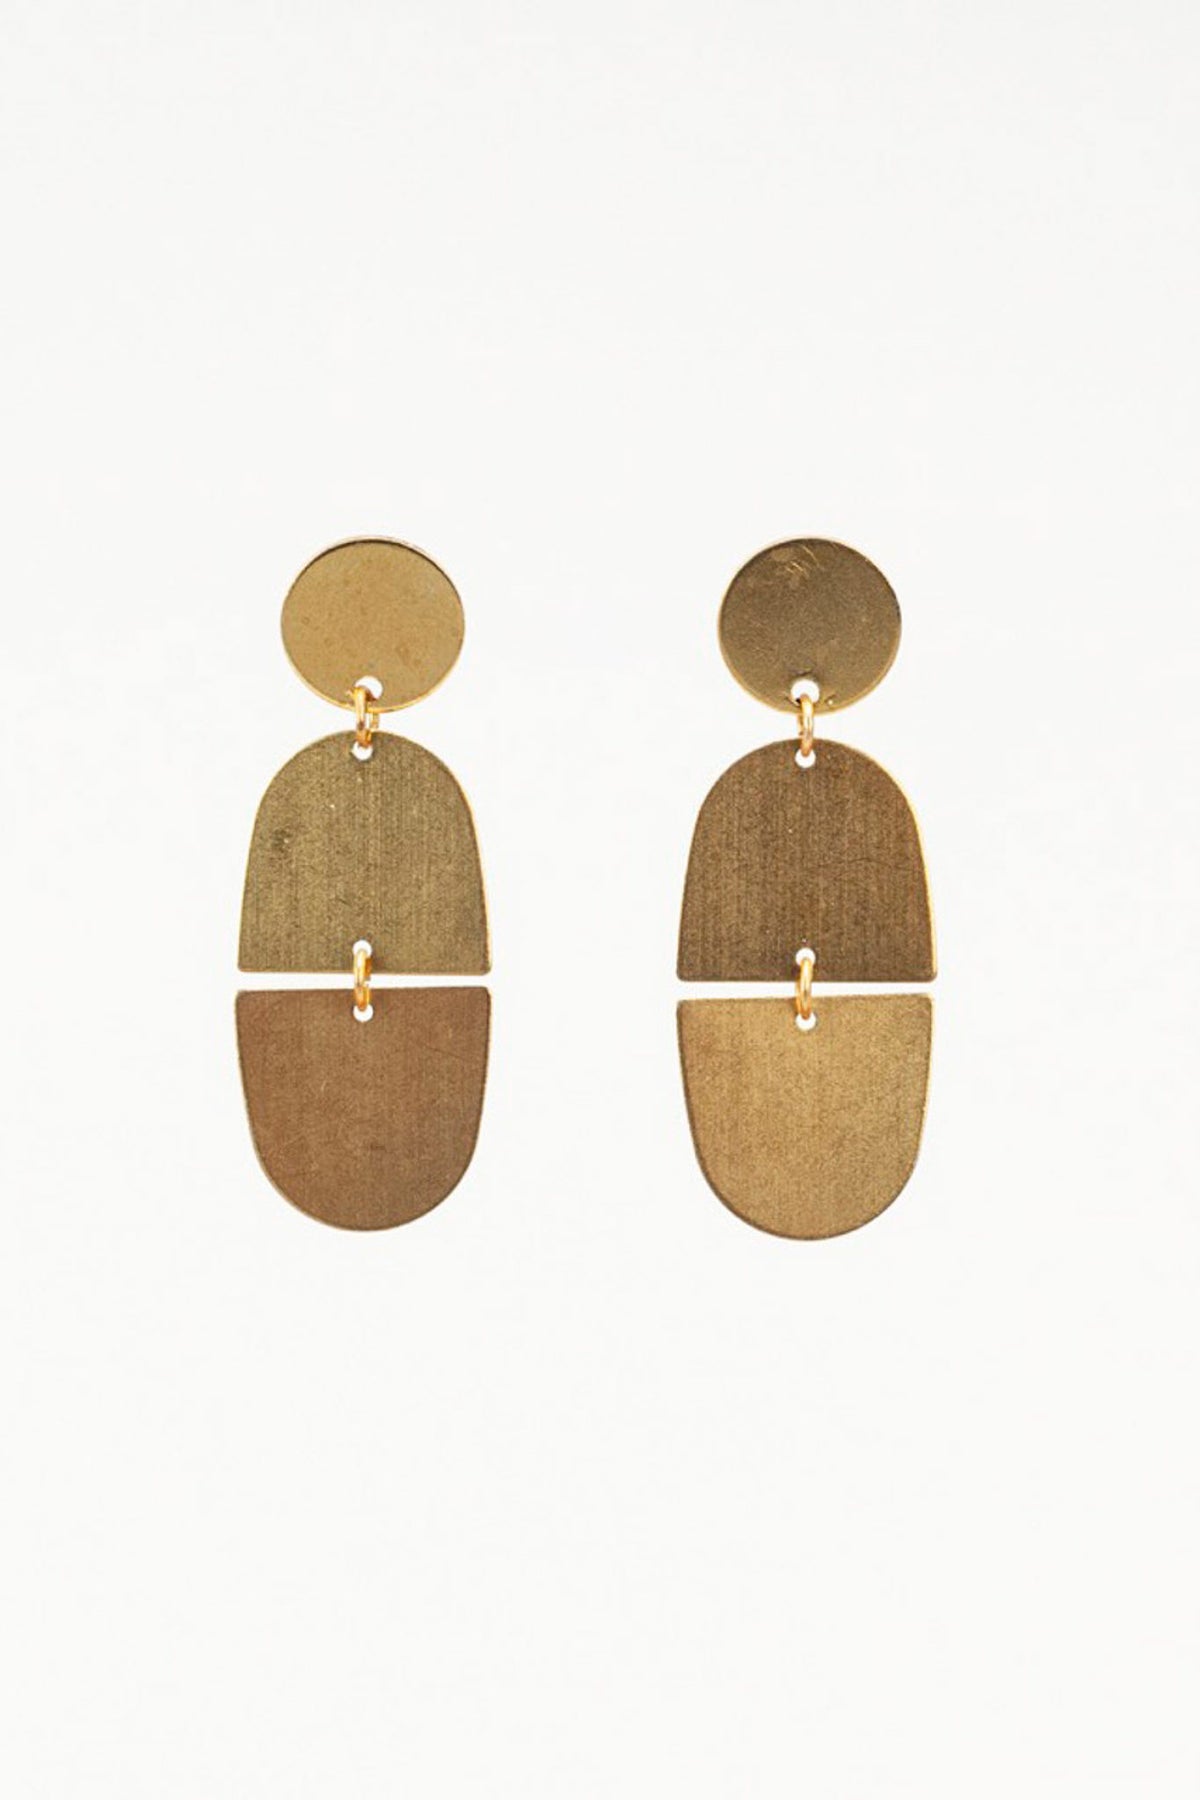 Altiplano Chill Pill Post Earrings